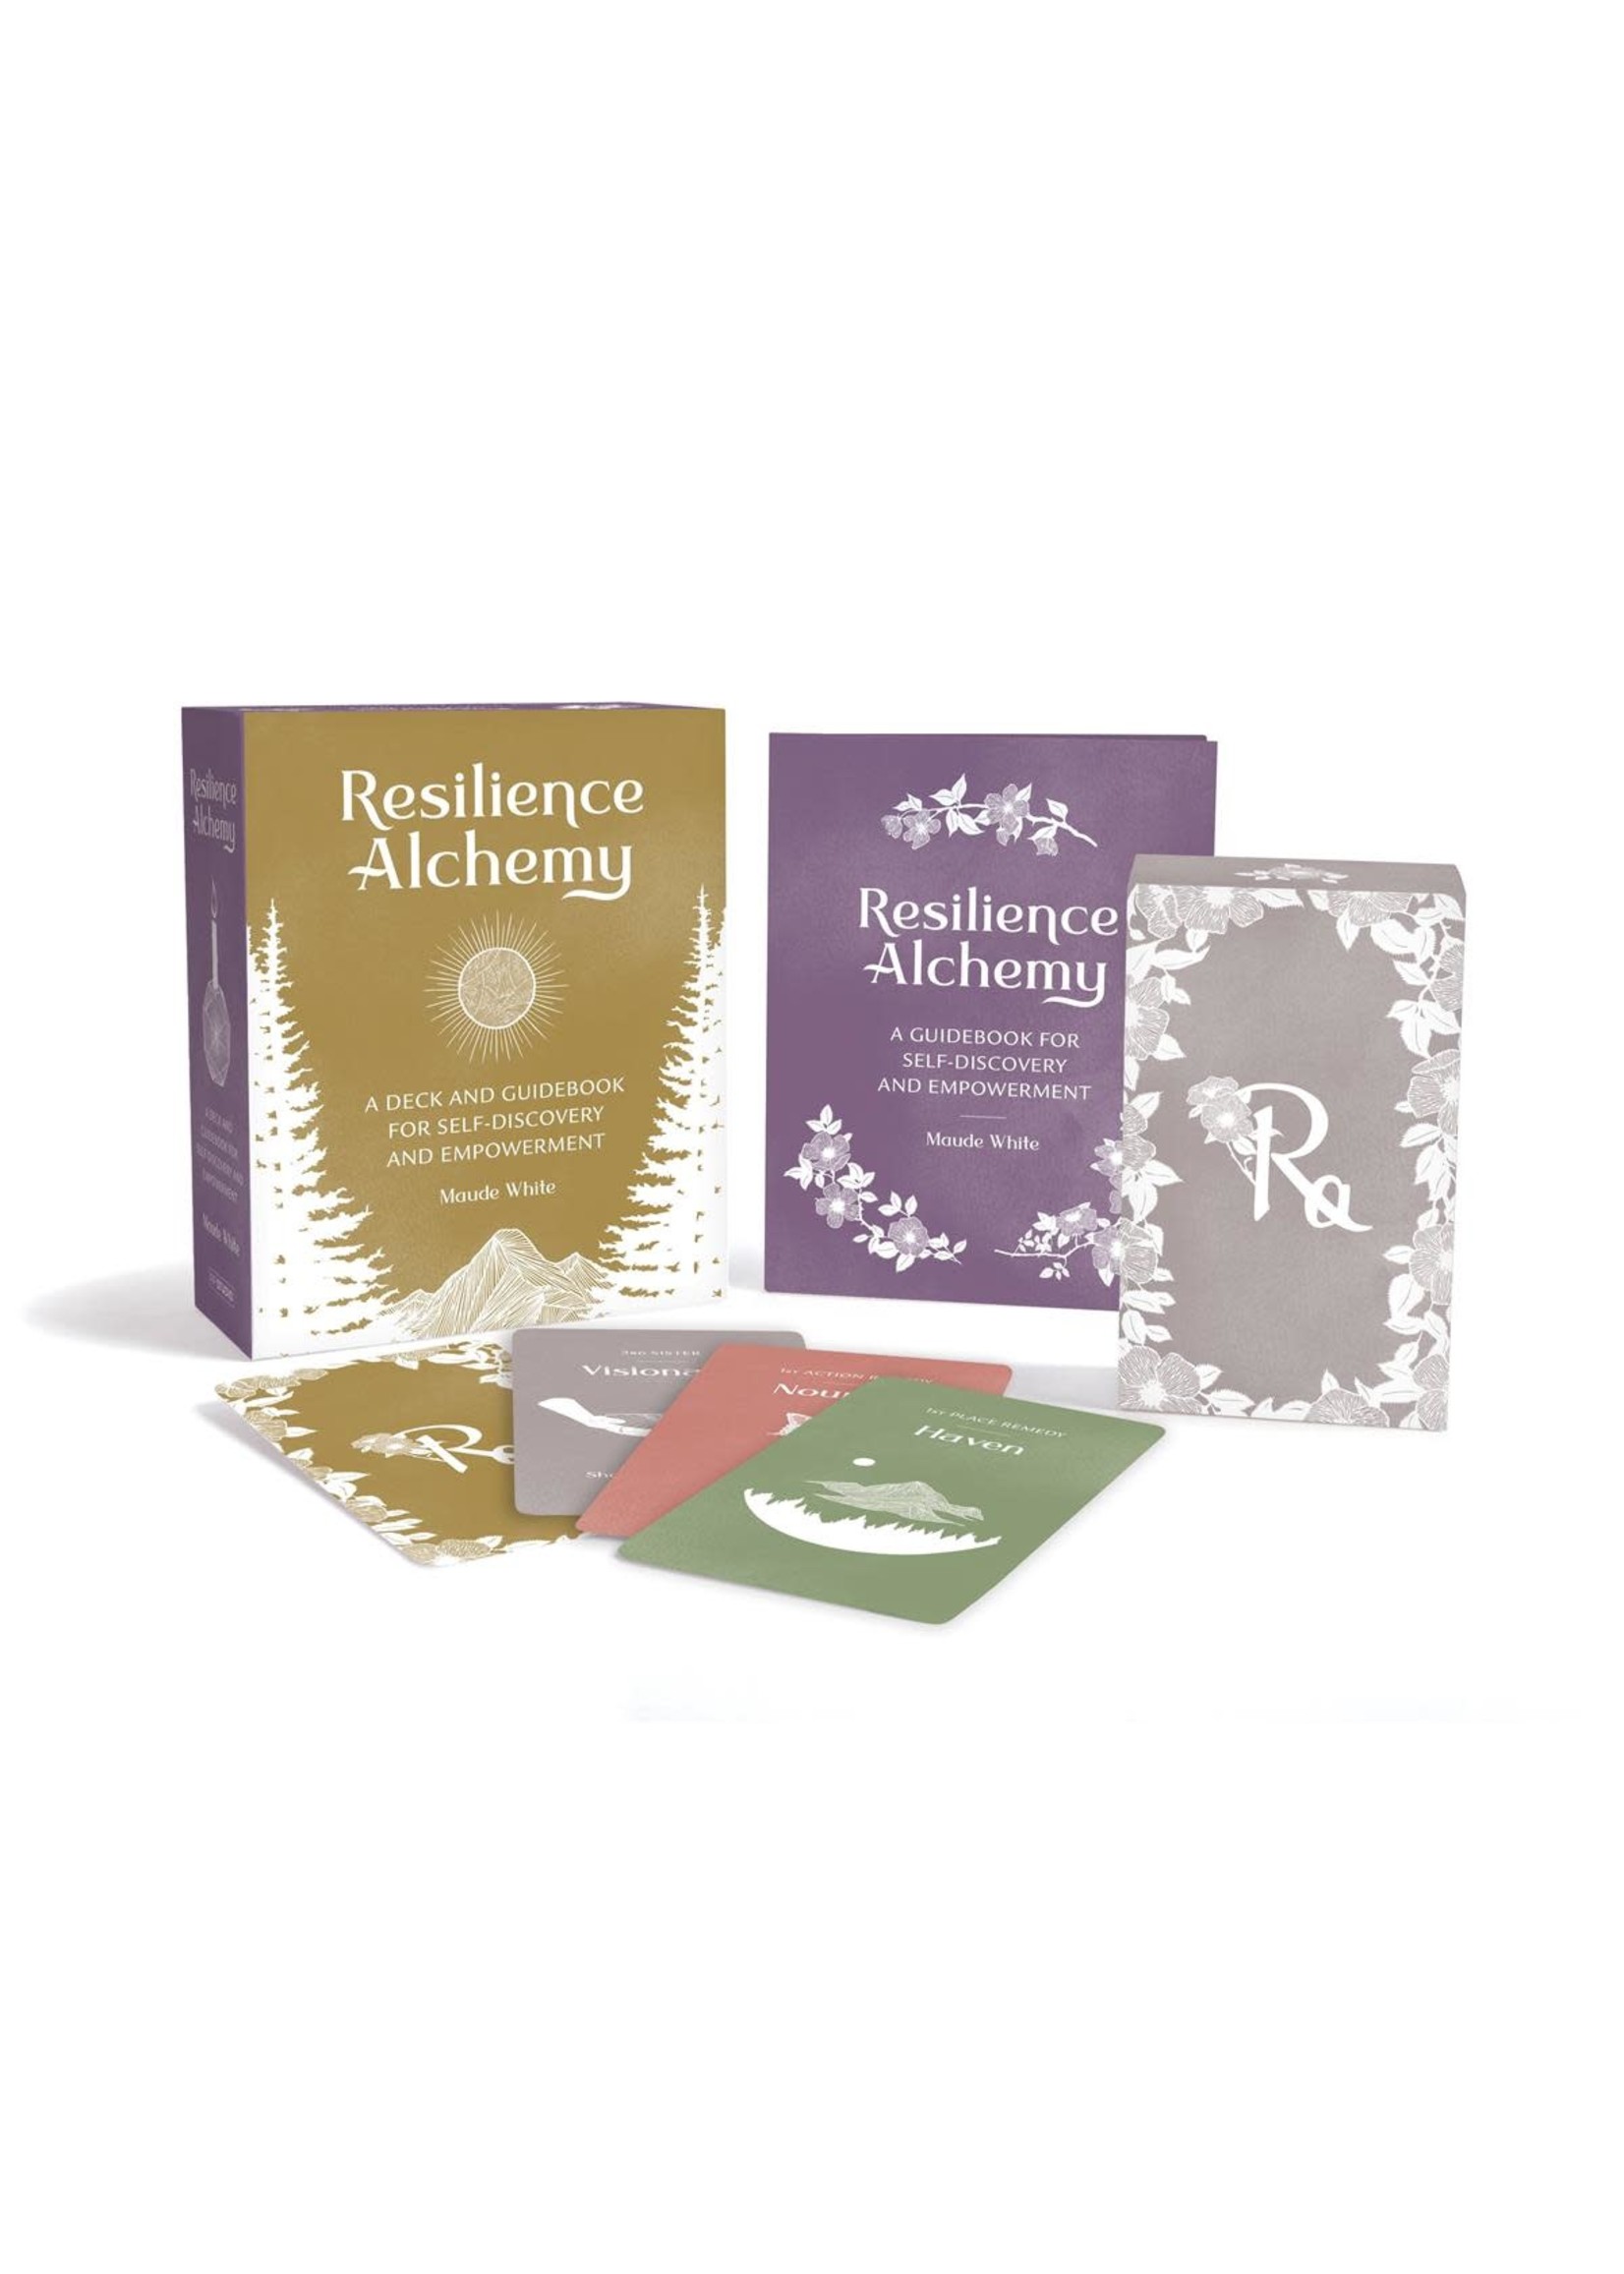 Resilience Alchemy: A Deck and Guidebook for Self-Discovery and Empowerment by Maude White